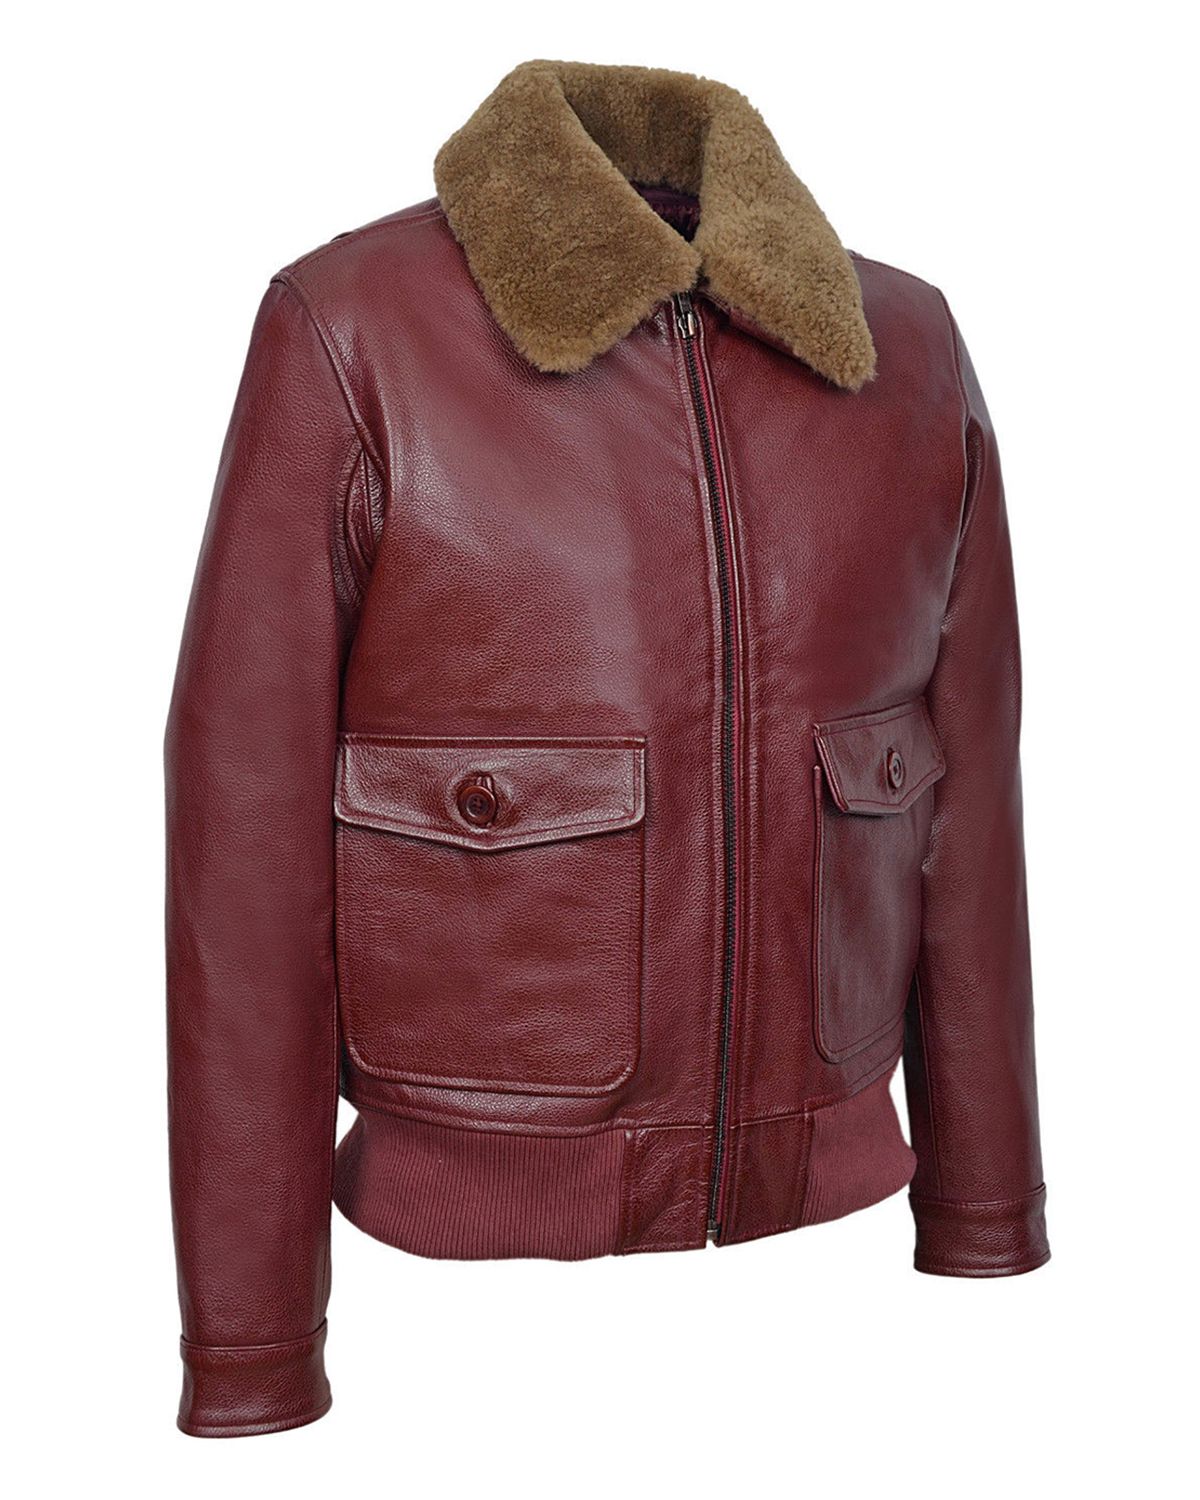 MotorCycleJackets Men's Cherry Bomber Ginger Fur Collar Real Leather Jacket